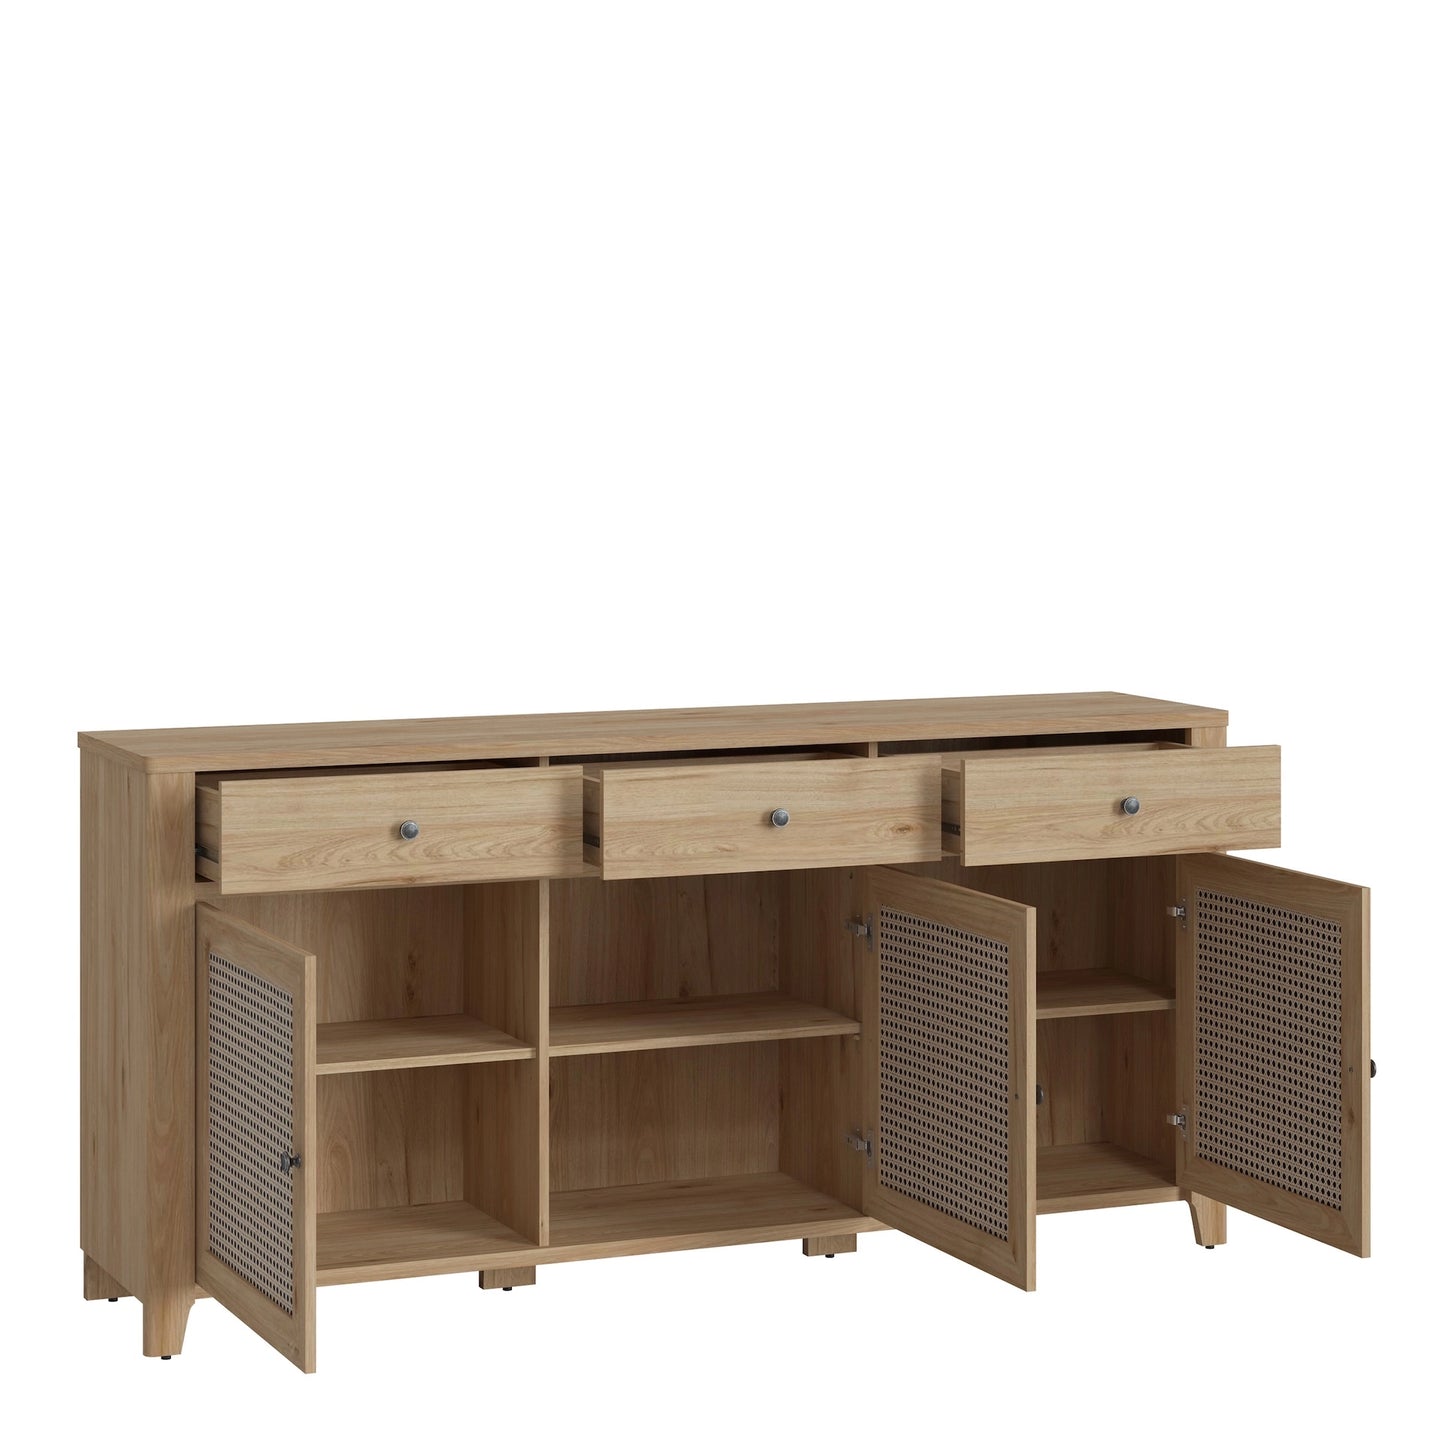 Furniture To Go Cestino 3 Door 3 Drawer Sideboard in Jackson Hickory Oak & Rattan Effects